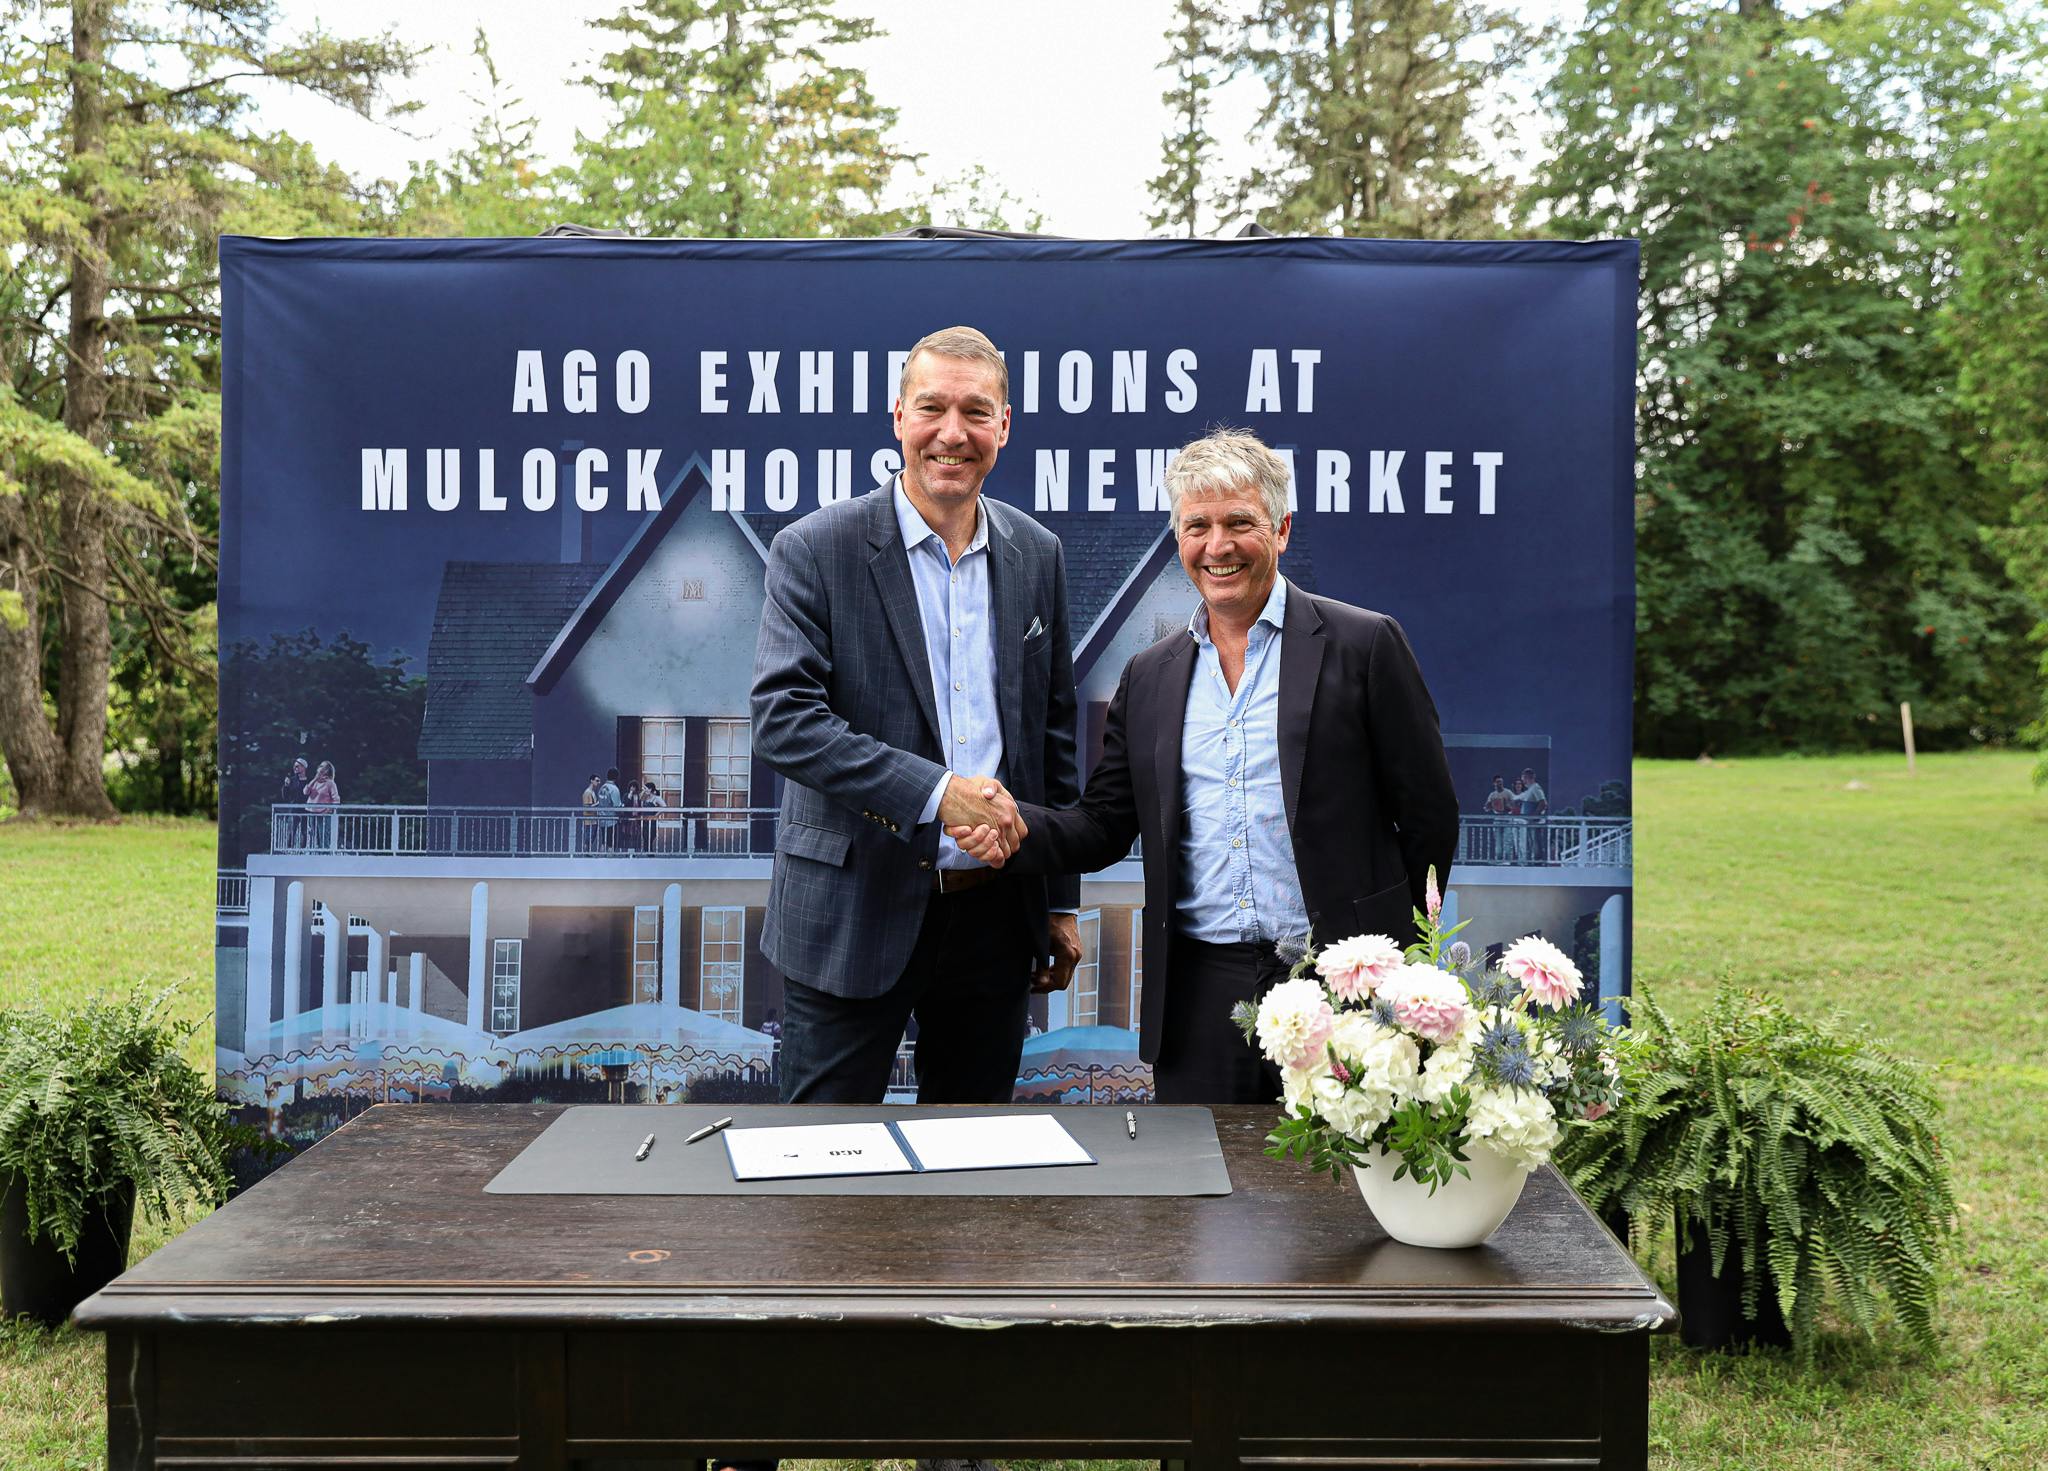 Newmarket Mayor John Taylor and Stephan Jost from the Art Gallery of Ontario (AGO) sign a memorandum of understanding on top of Sir William Mulock's desk to bring AGO exhibitions to the Mulock House at the landmark Mulock Park when it opens in 2025.